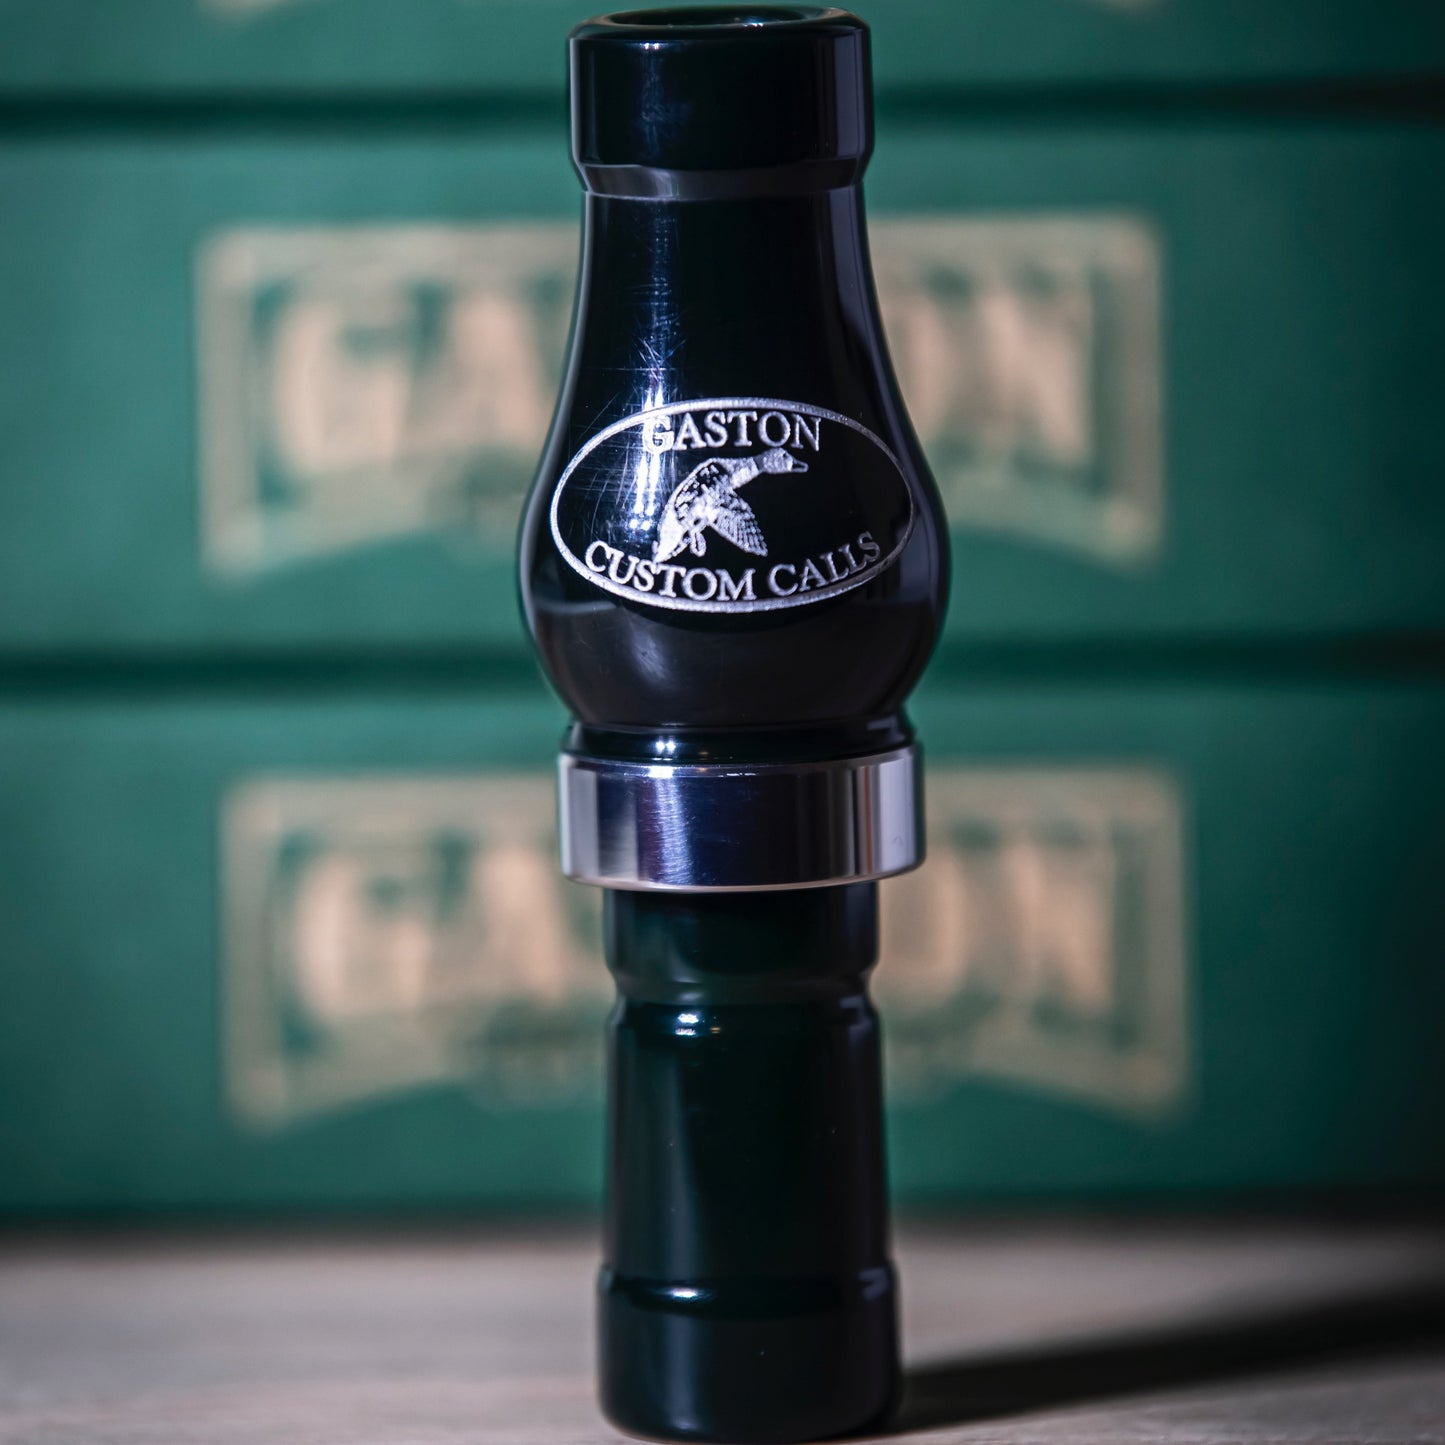 The "Twister", Snow Goose Call